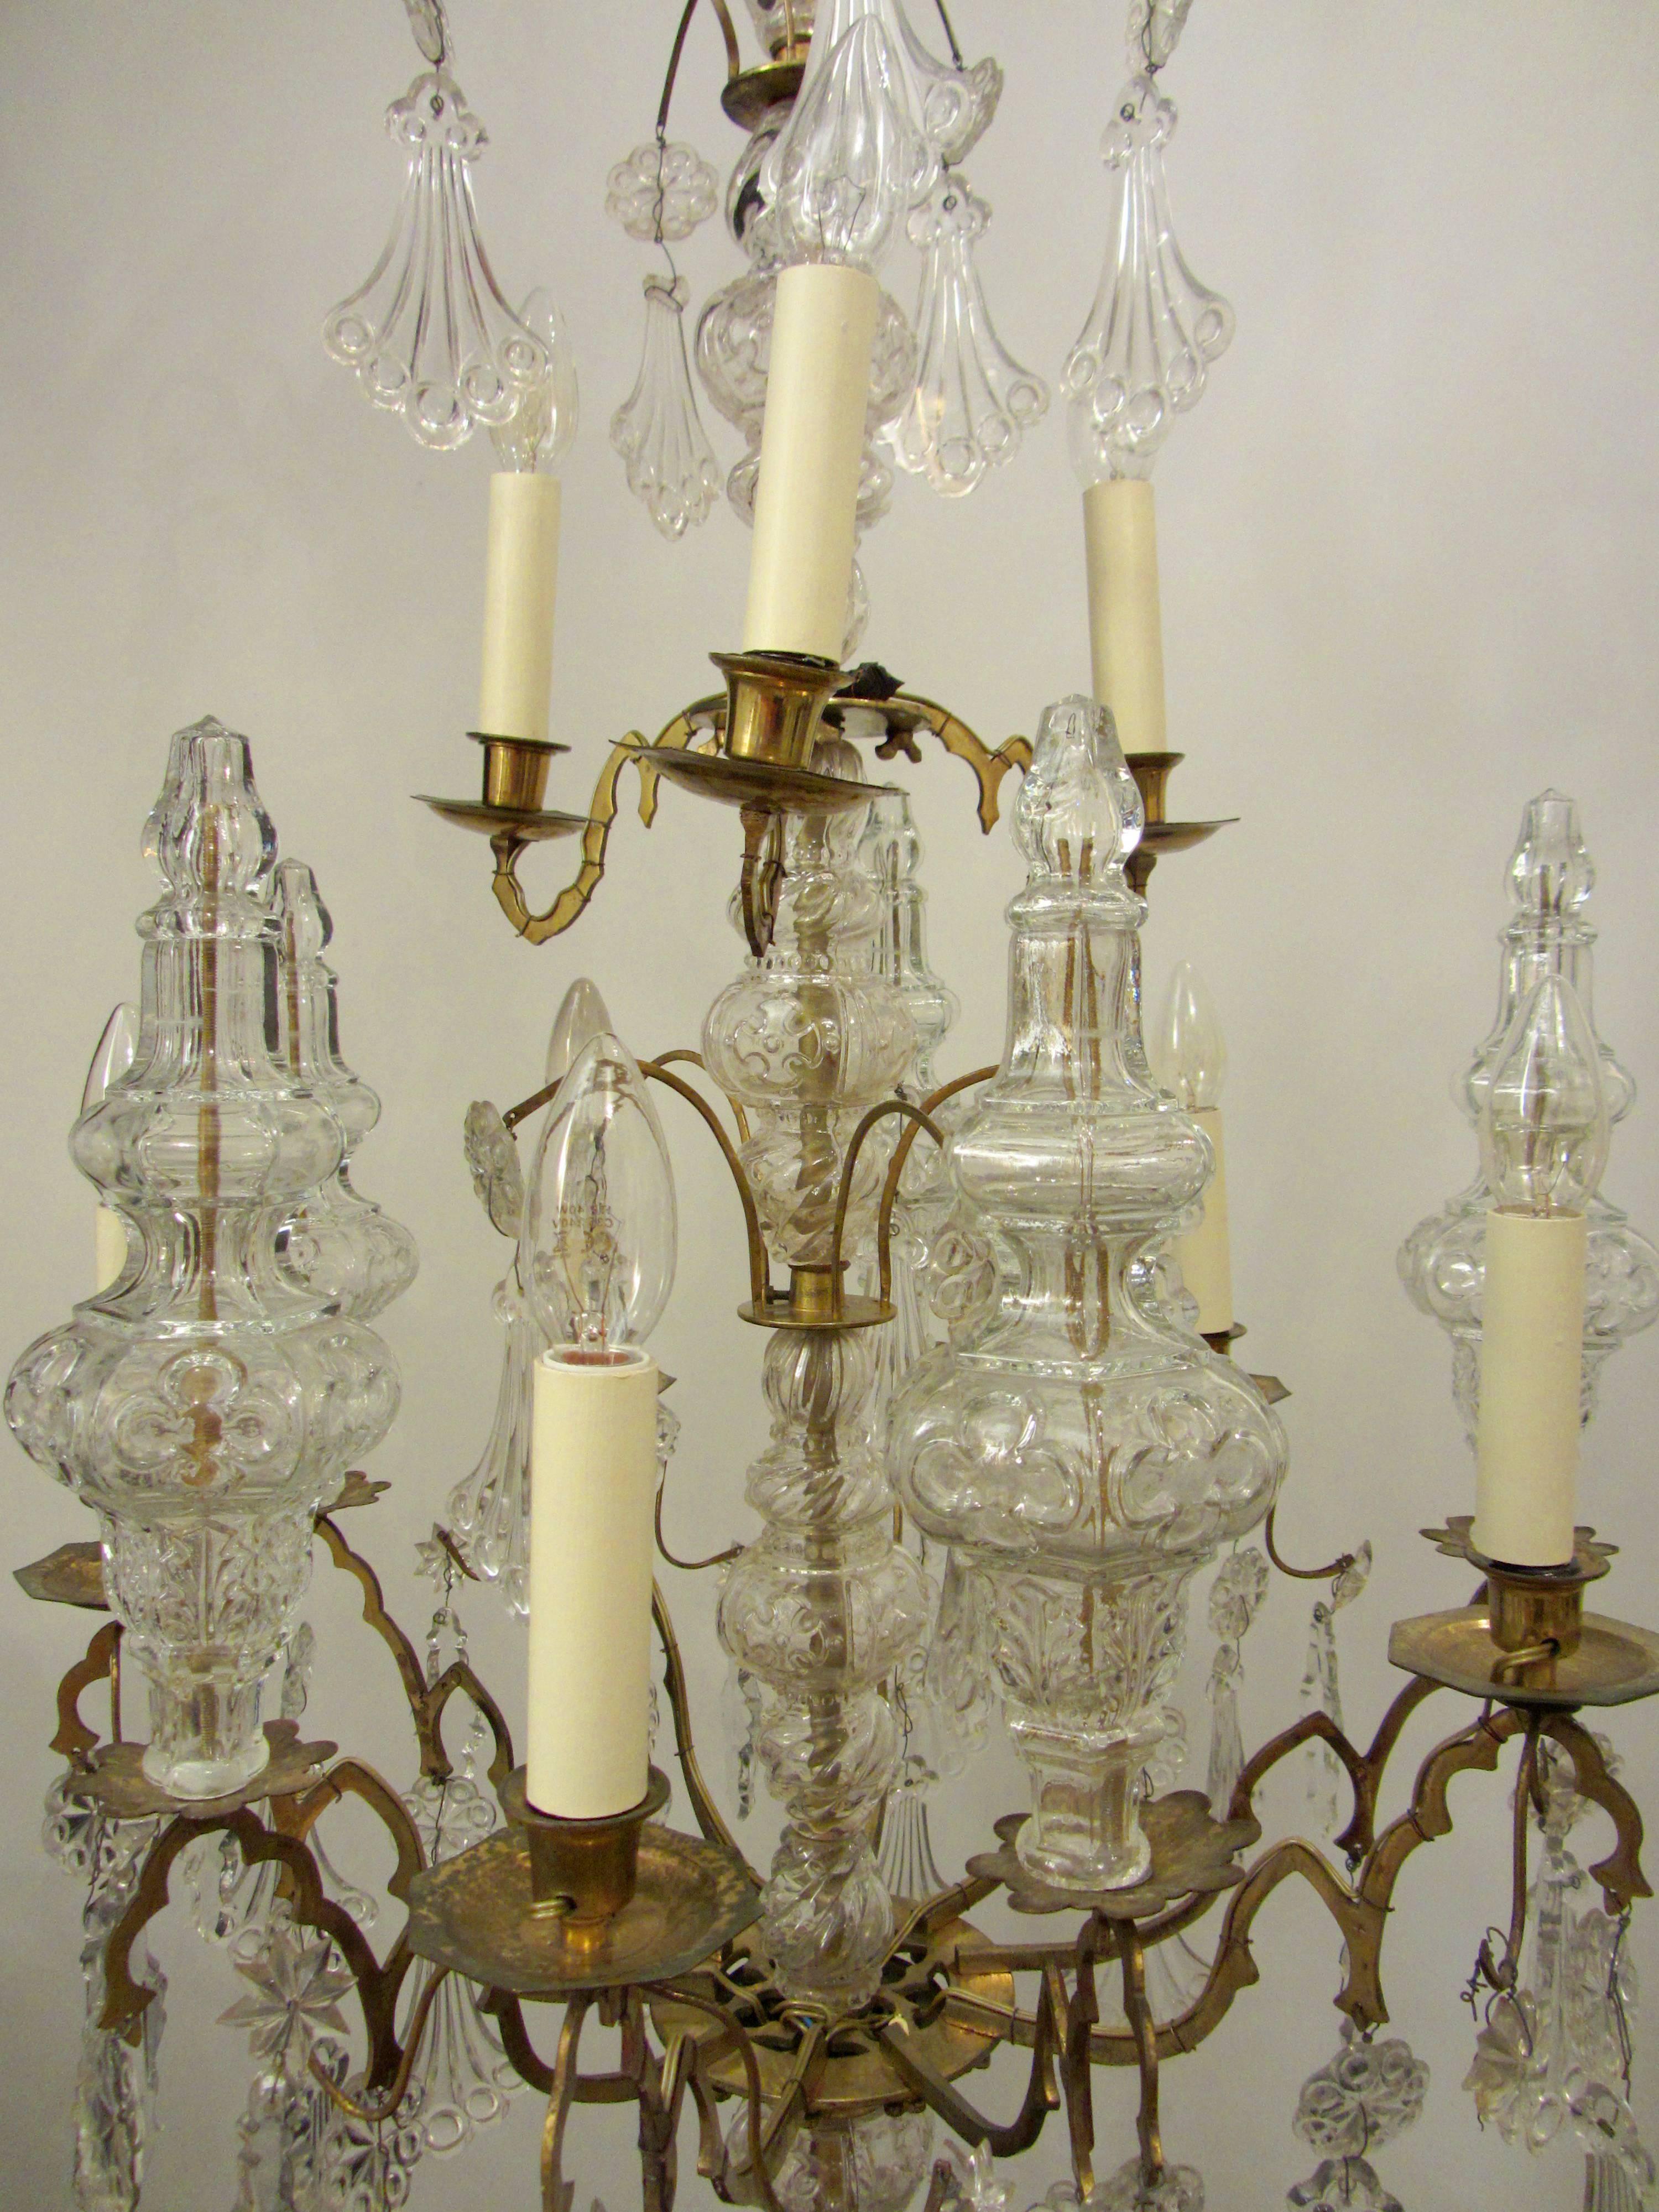 Gothic Revival Silvered Gothic Style Chandelier For Sale